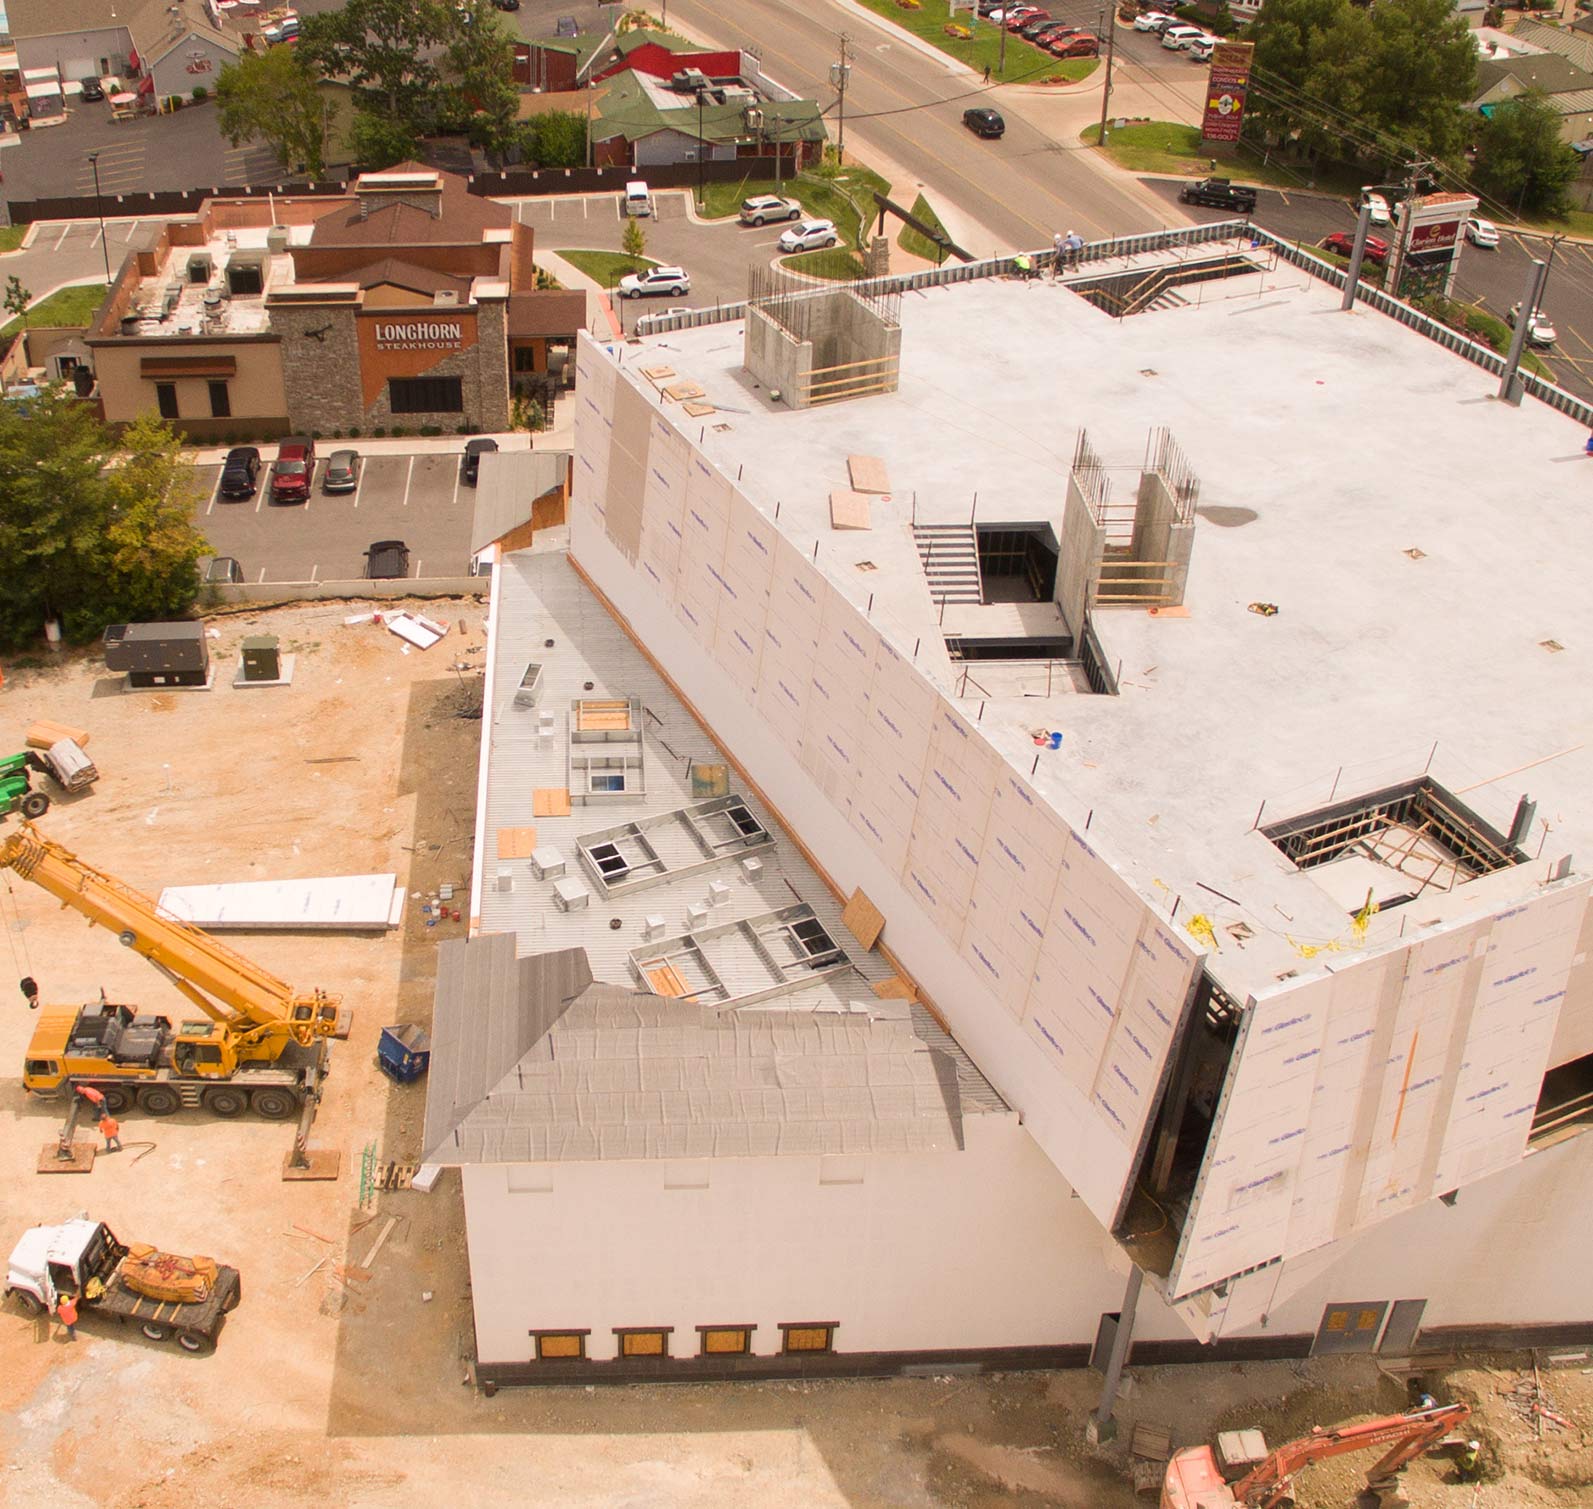 Aerial view of prefabricated metal panel placement at Wonderworks Branson MO location